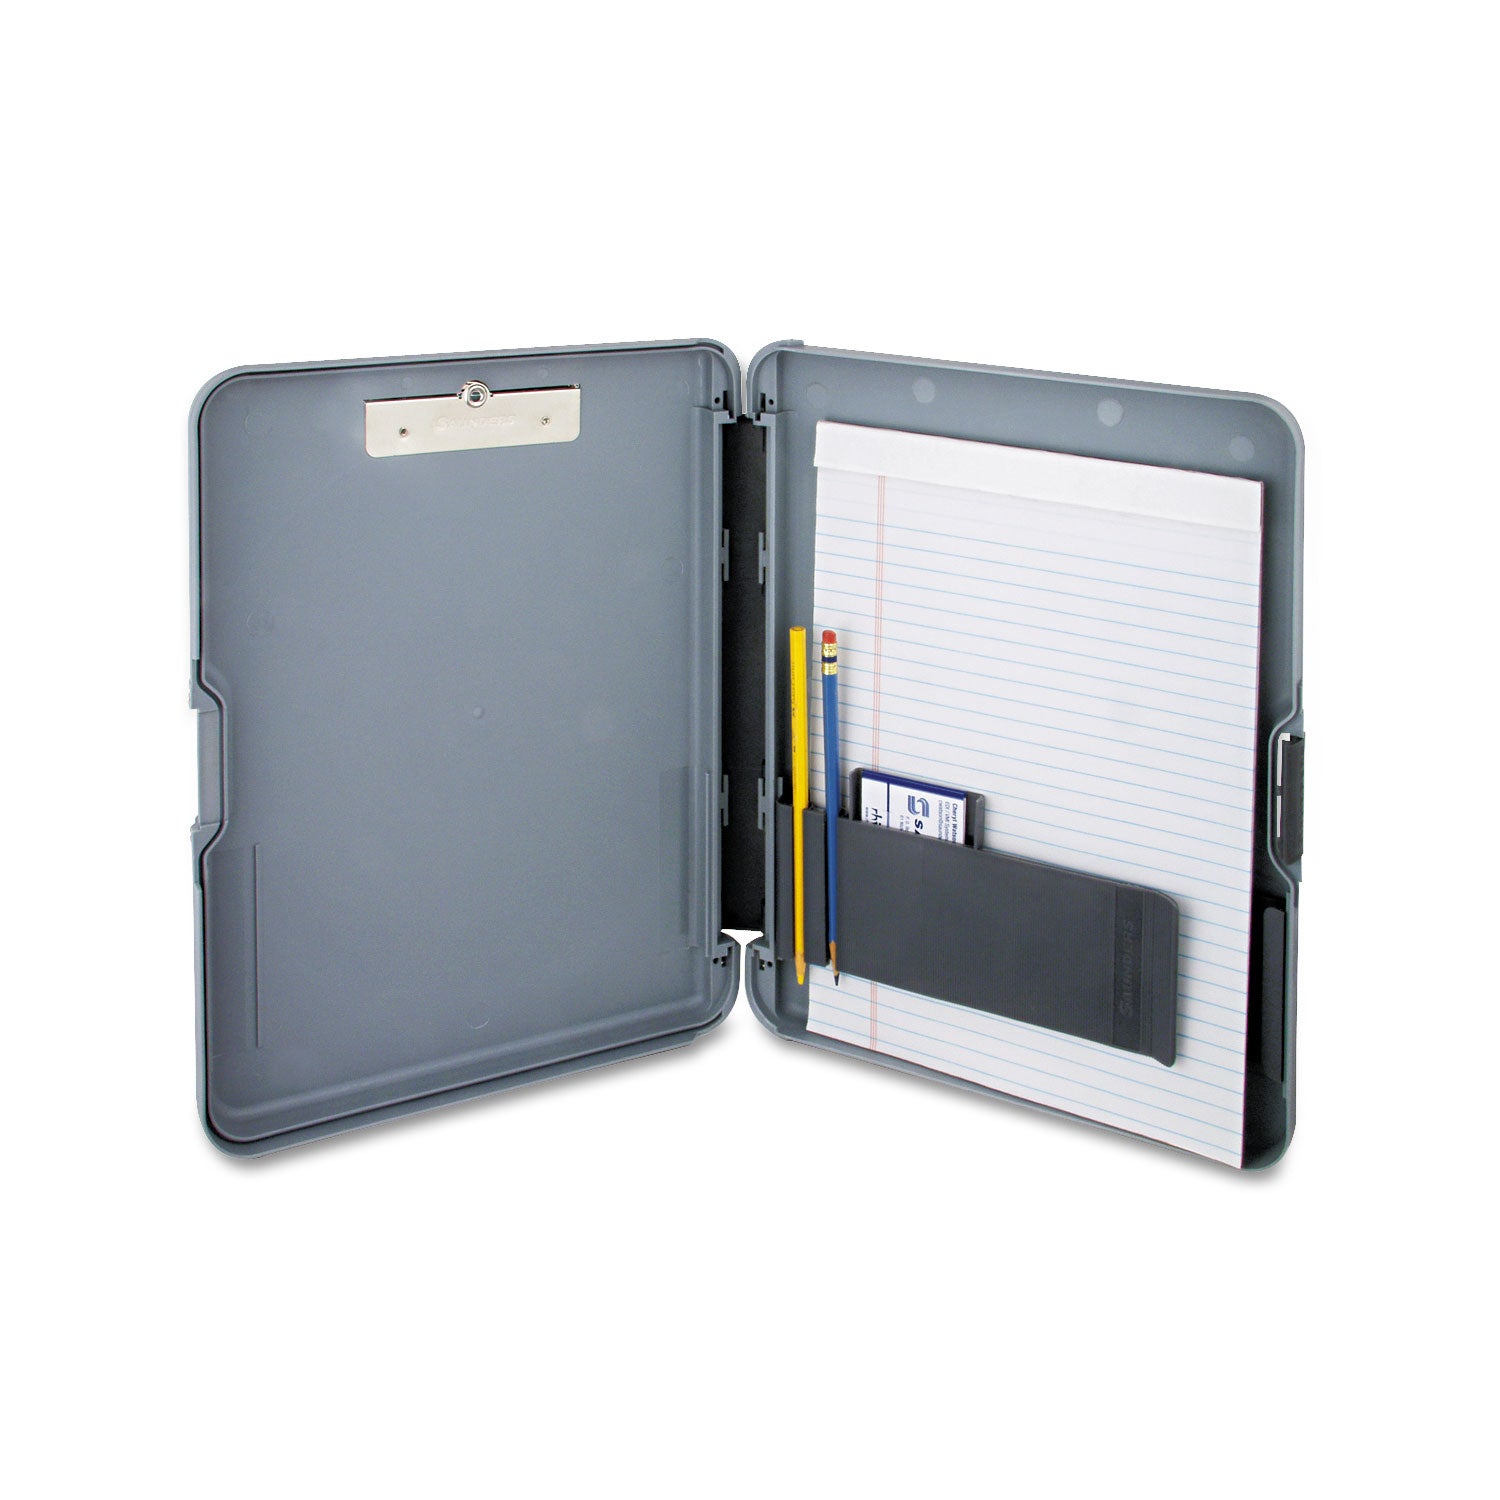 WorkMate Storage Clipboard, 0.5" Clip Capacity, Holds 8.5 x 11 Sheets, Charcoal/Gray - 